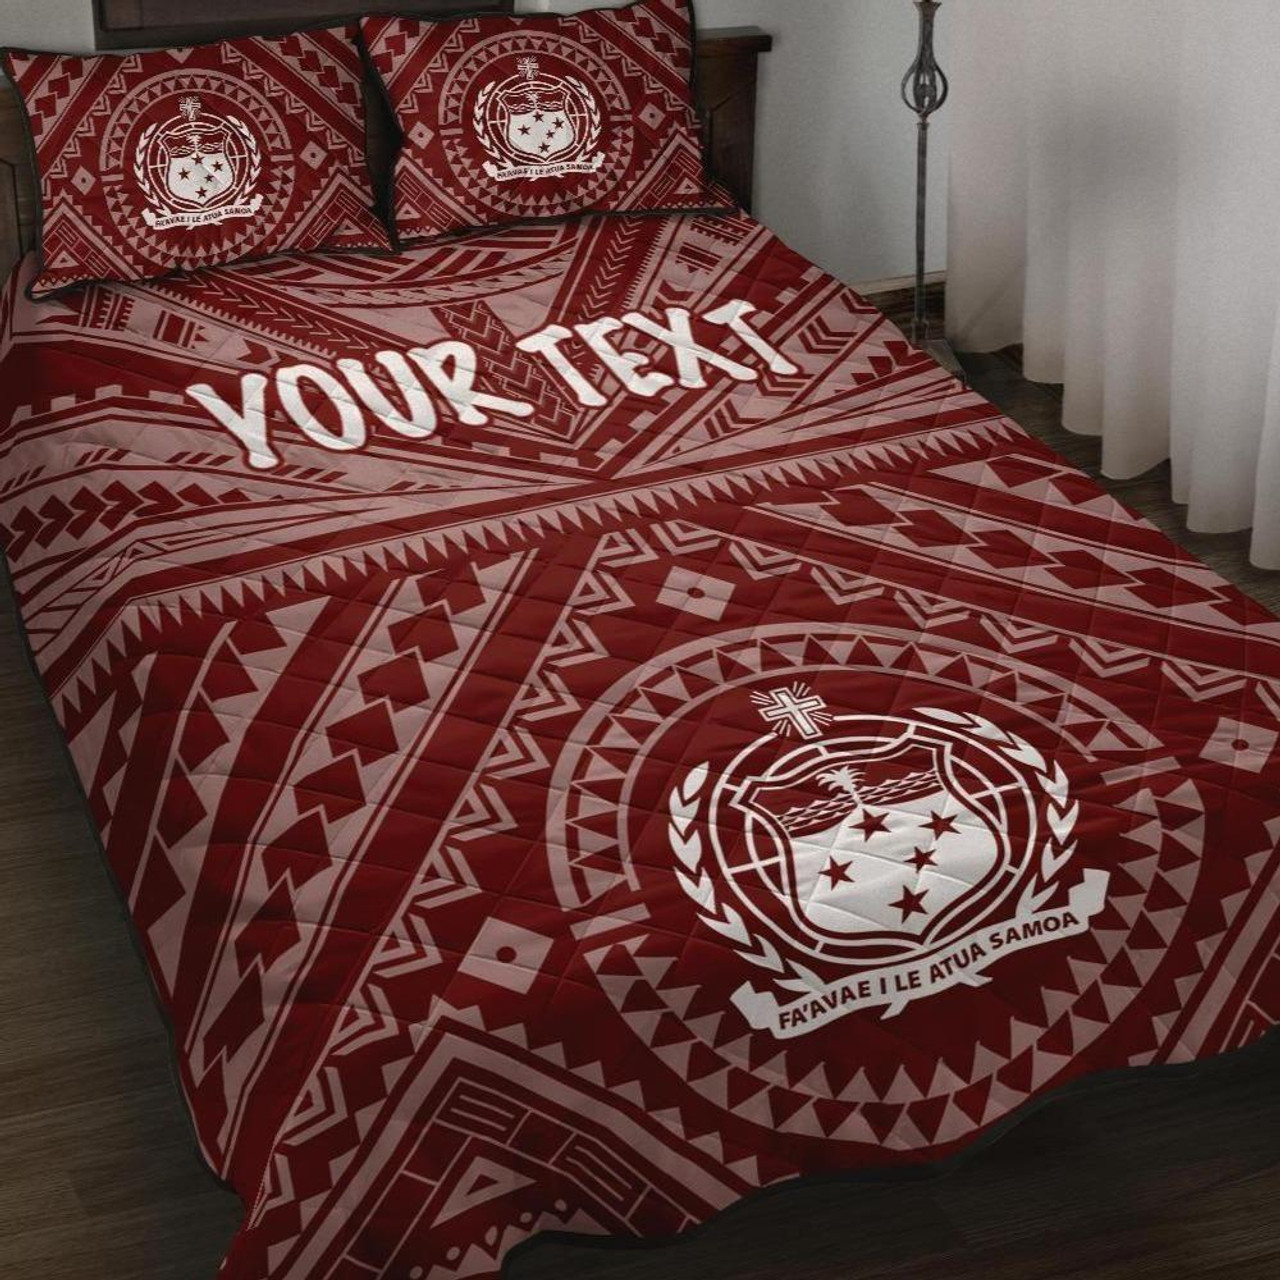 Samoa Personalised Quilt Bed Set - Samoa Seal In Polynesian Tattoo Style (Red) 1